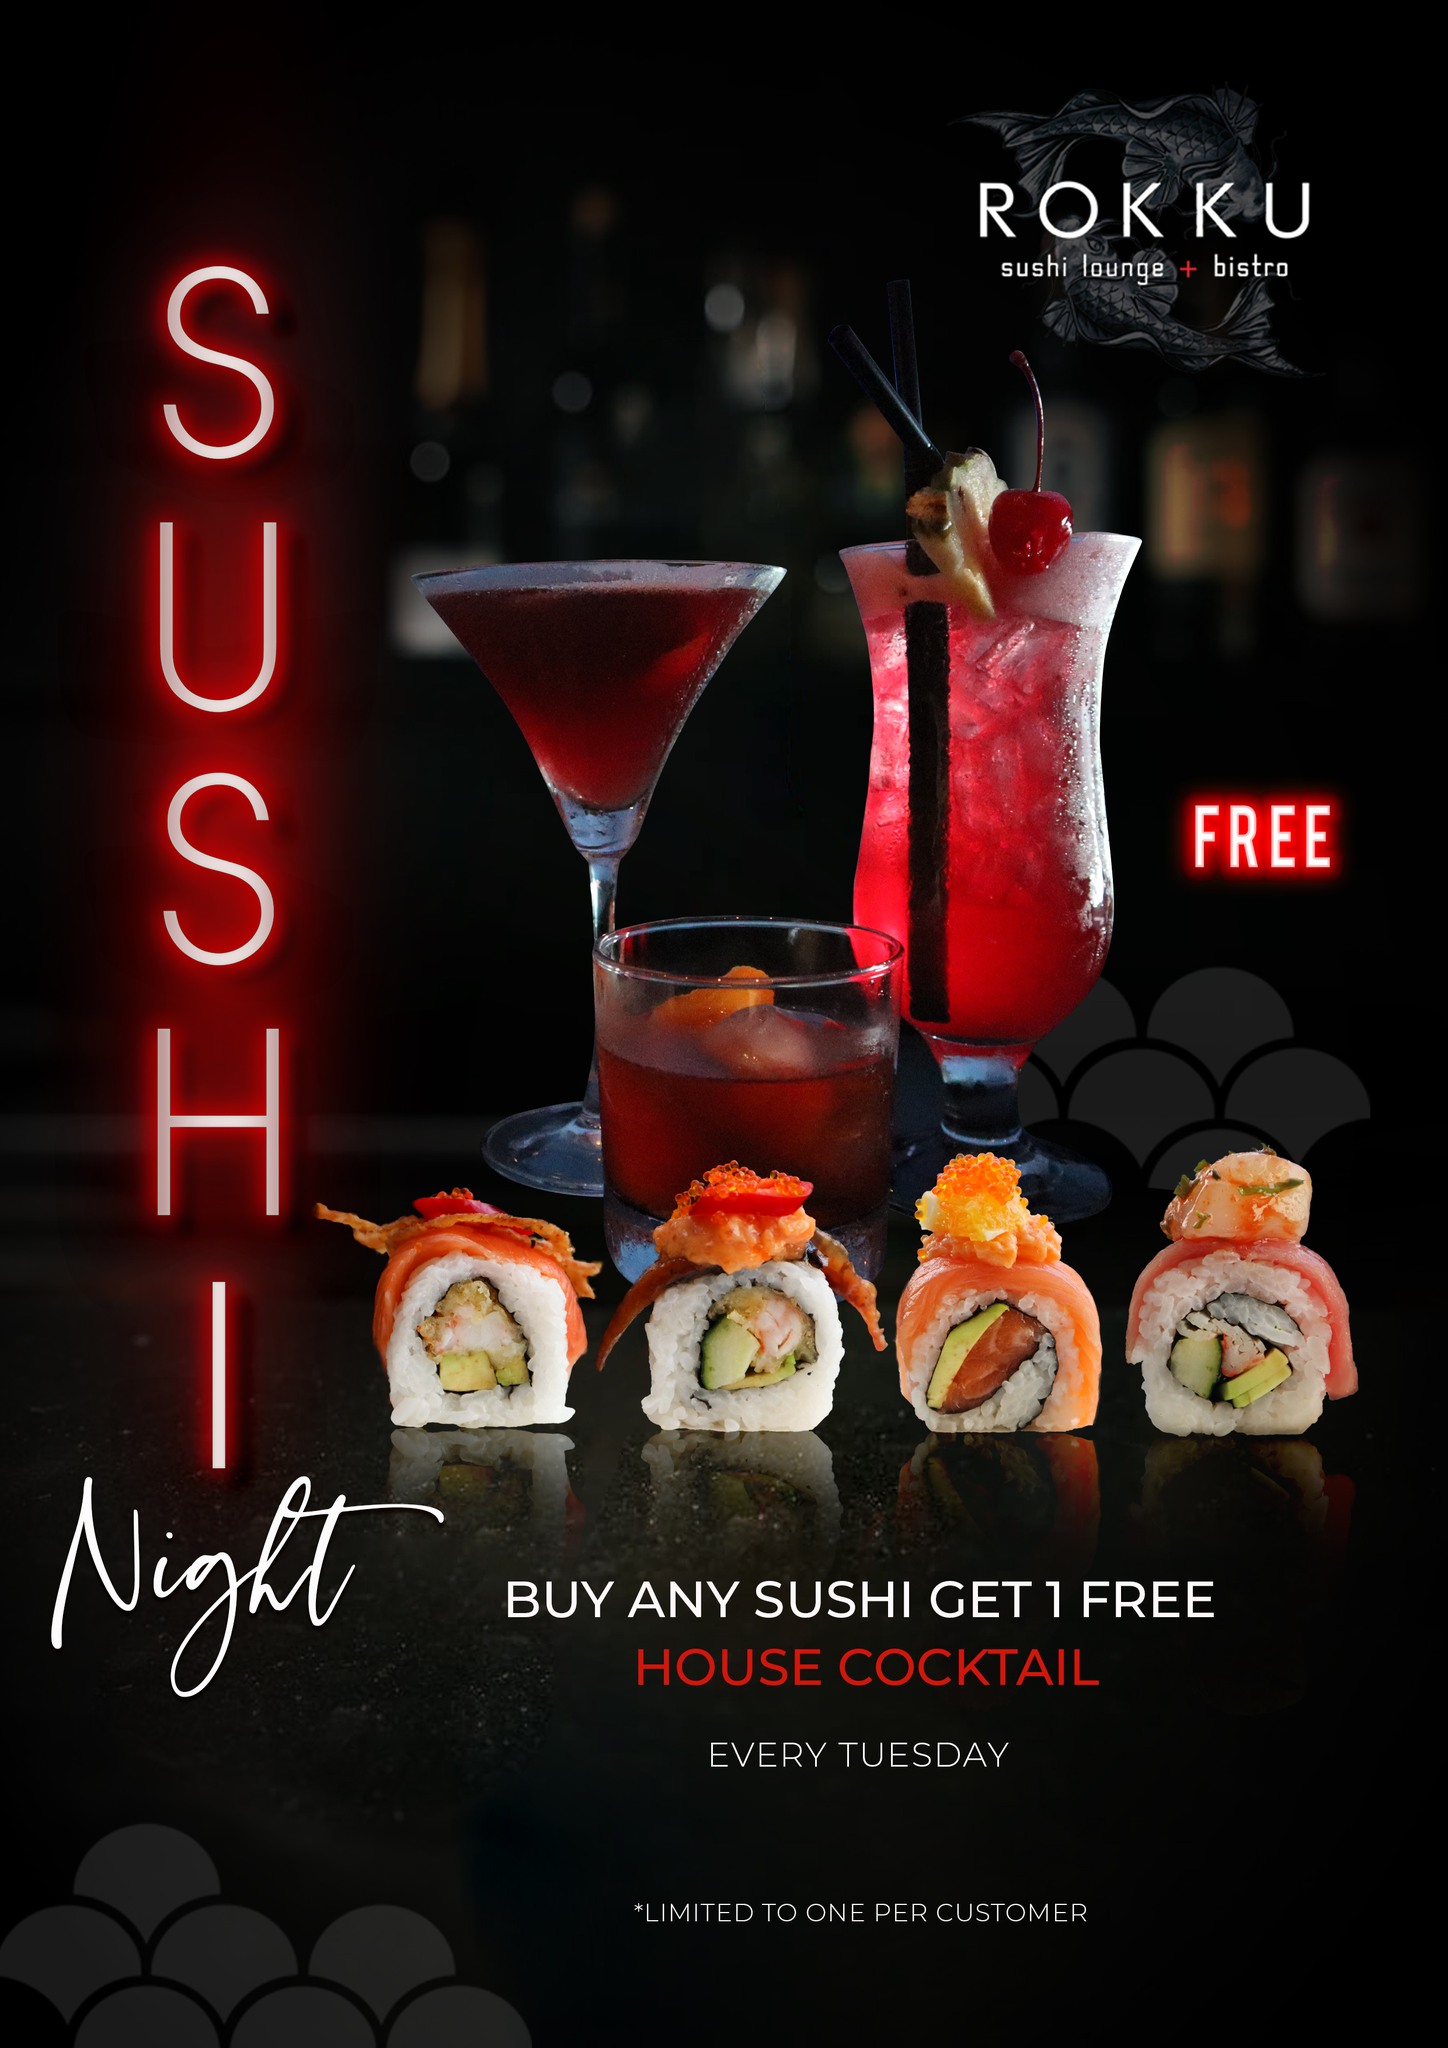 SUSHI NIGHT EVERY TUESDAY AT ROKKU ON MARCH 1ST